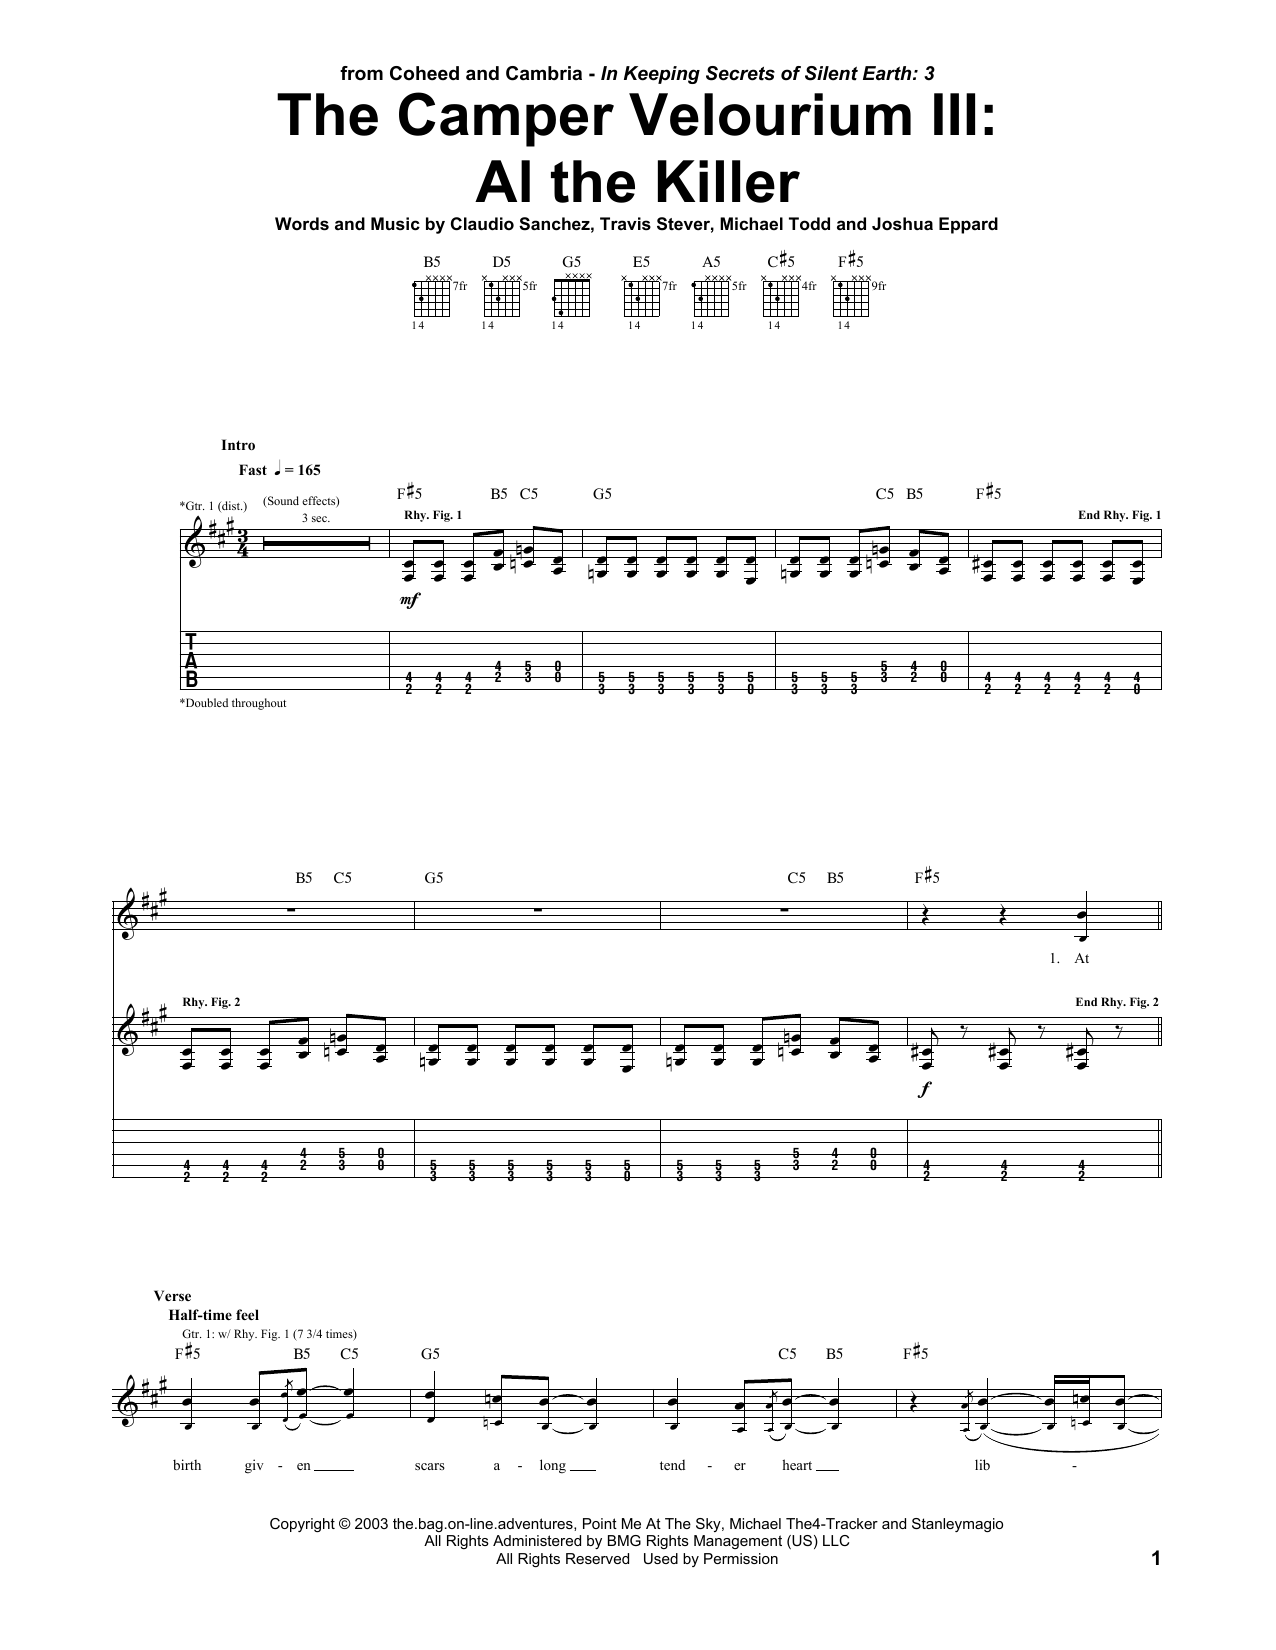 Download Coheed And Cambria The Camper Velourium III: Al The Killer Sheet Music